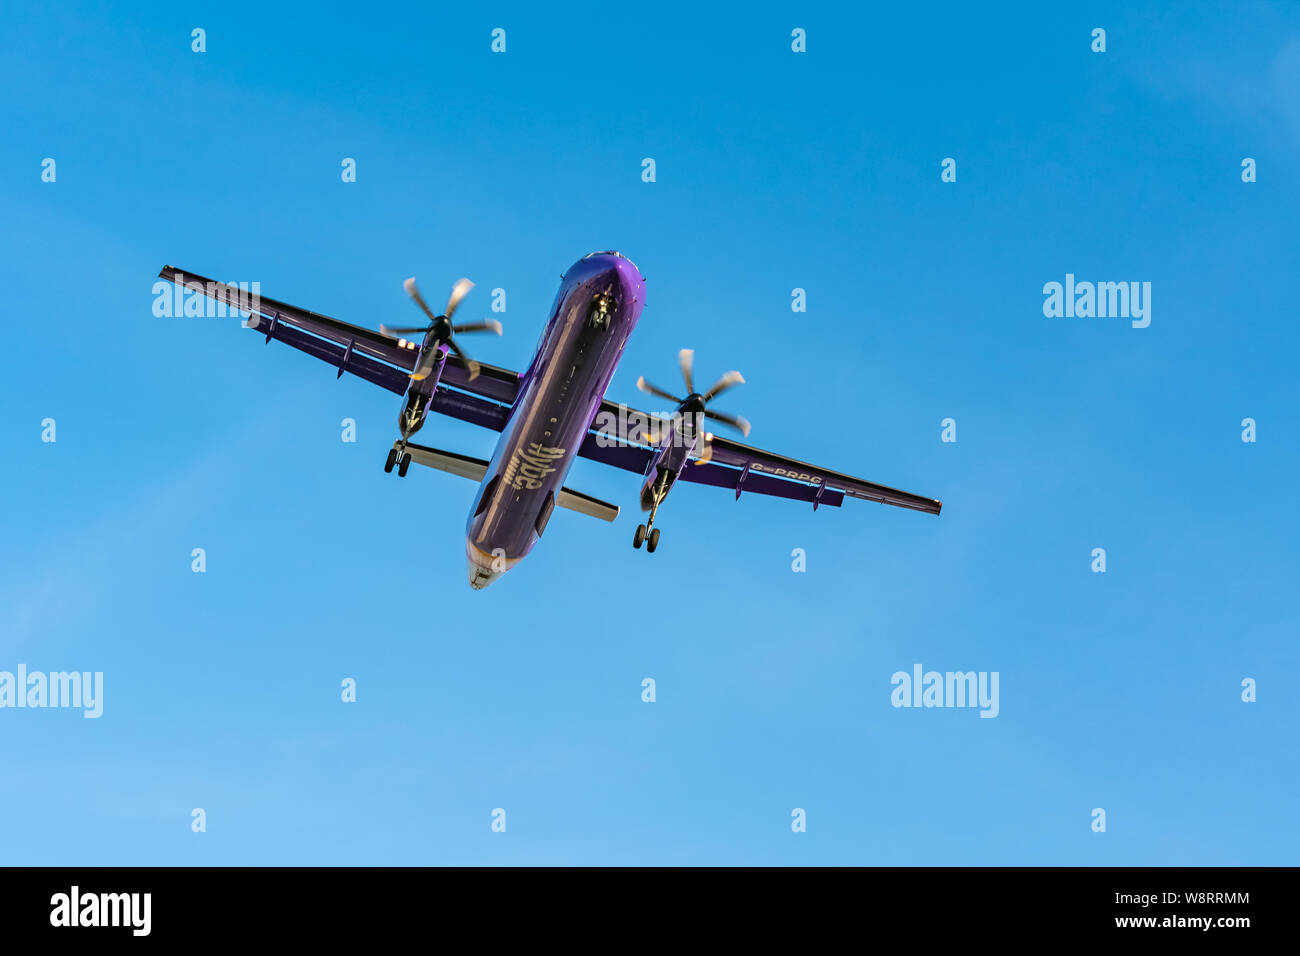 London, UK - 17, February 2019: Flybe a British regional airline based in England, aircraft type De Havilland Canada DHC-8-400 Fly on blue sky Stock Photo